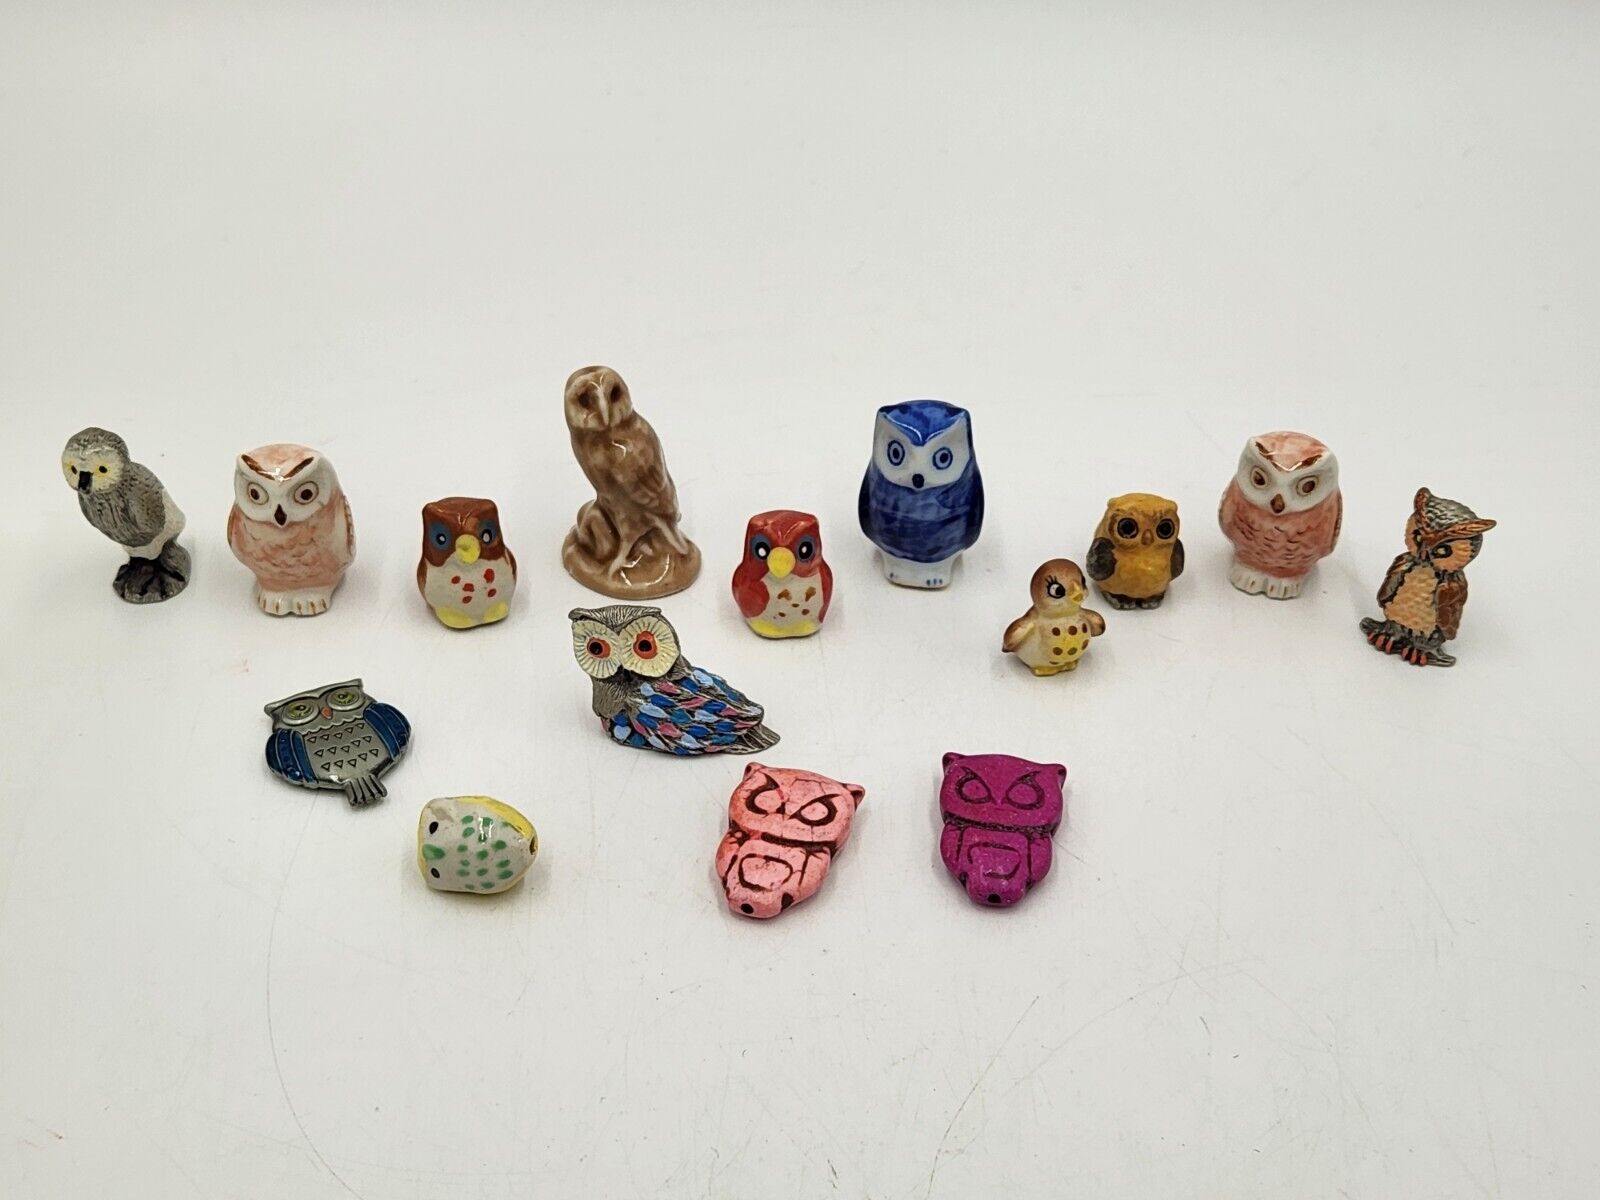 Vintage Lot of 15 Owls Ceramic Miniature Figurines and Owl Beads Mixed Lot